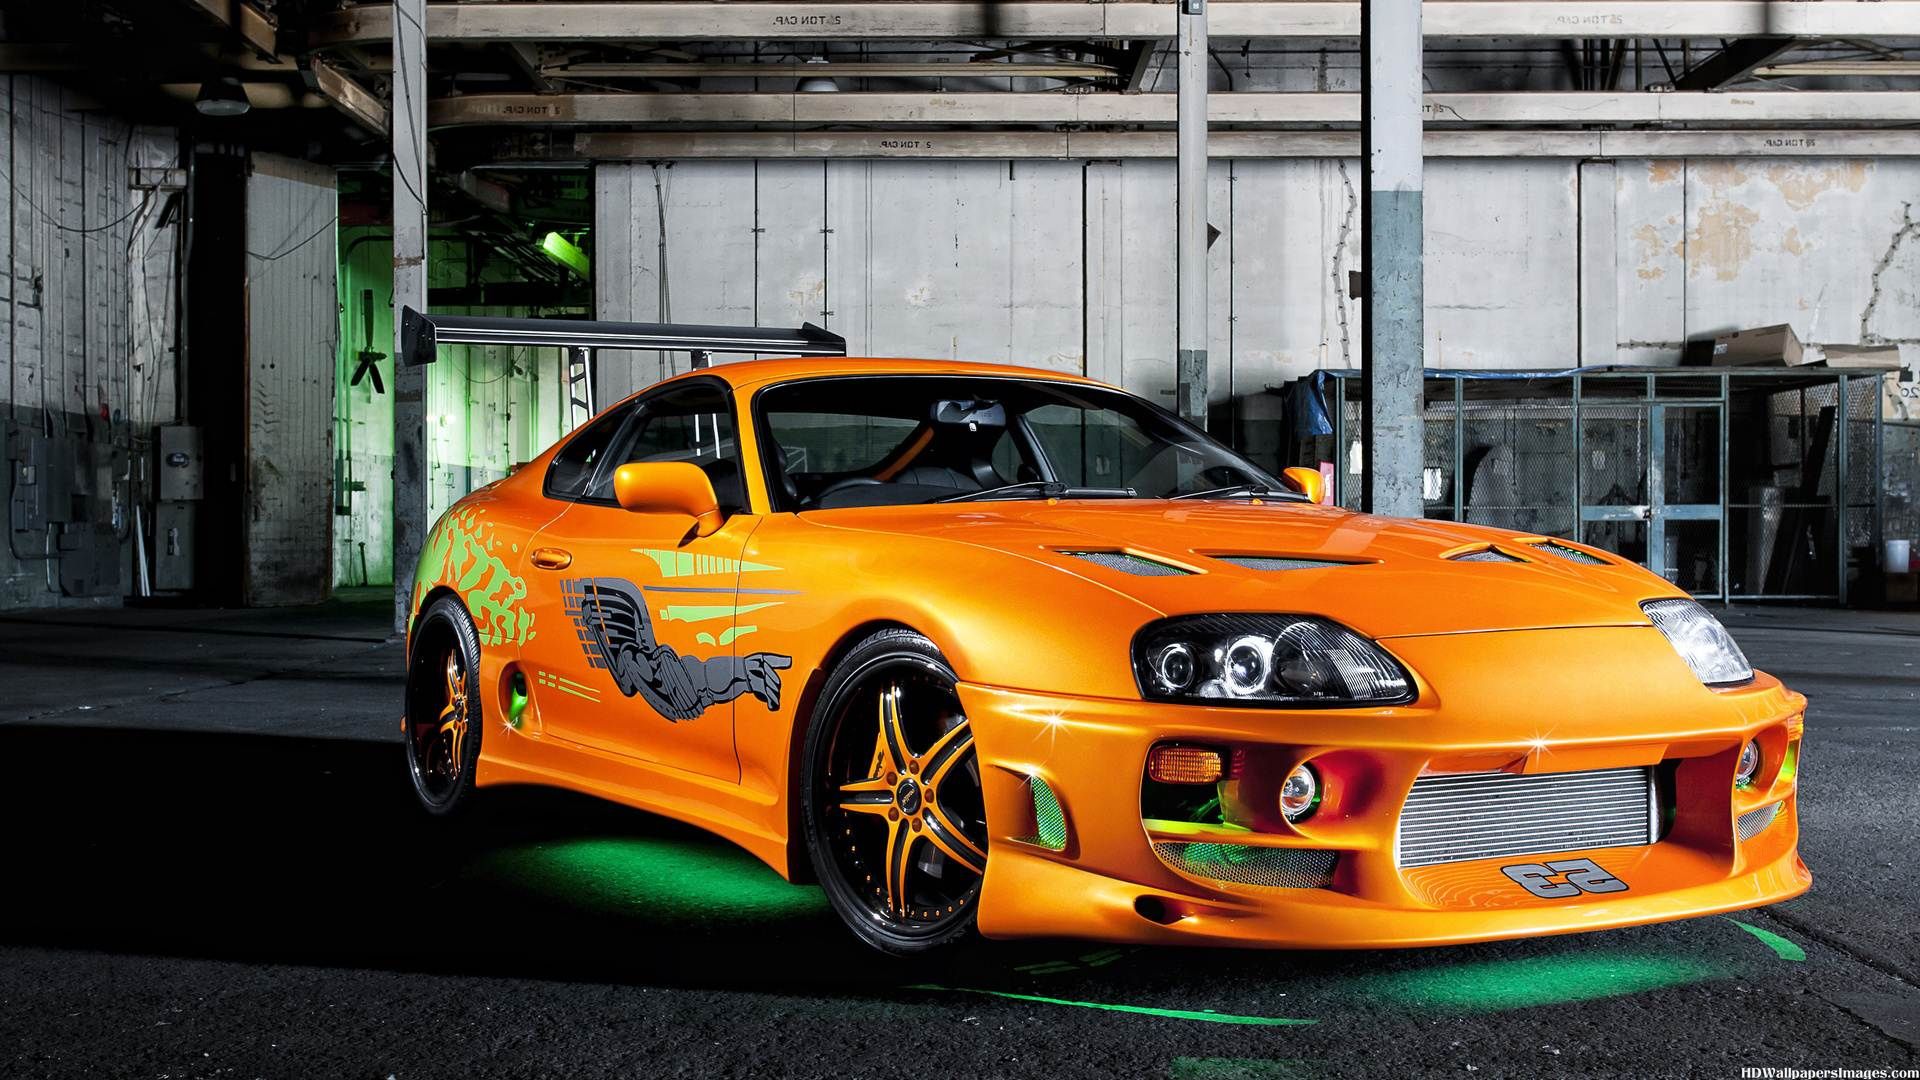 Free download Toyota Supra Fast And Furious HD Wallpaper 4T4ORG [1920x1080] for your Desktop, Mobile & Tablet. Explore Supra Wallpaper. Supra Shoes Wallpaper, Supra iPhone Wallpaper, Toyota Supra Wallpaper iPhone 5